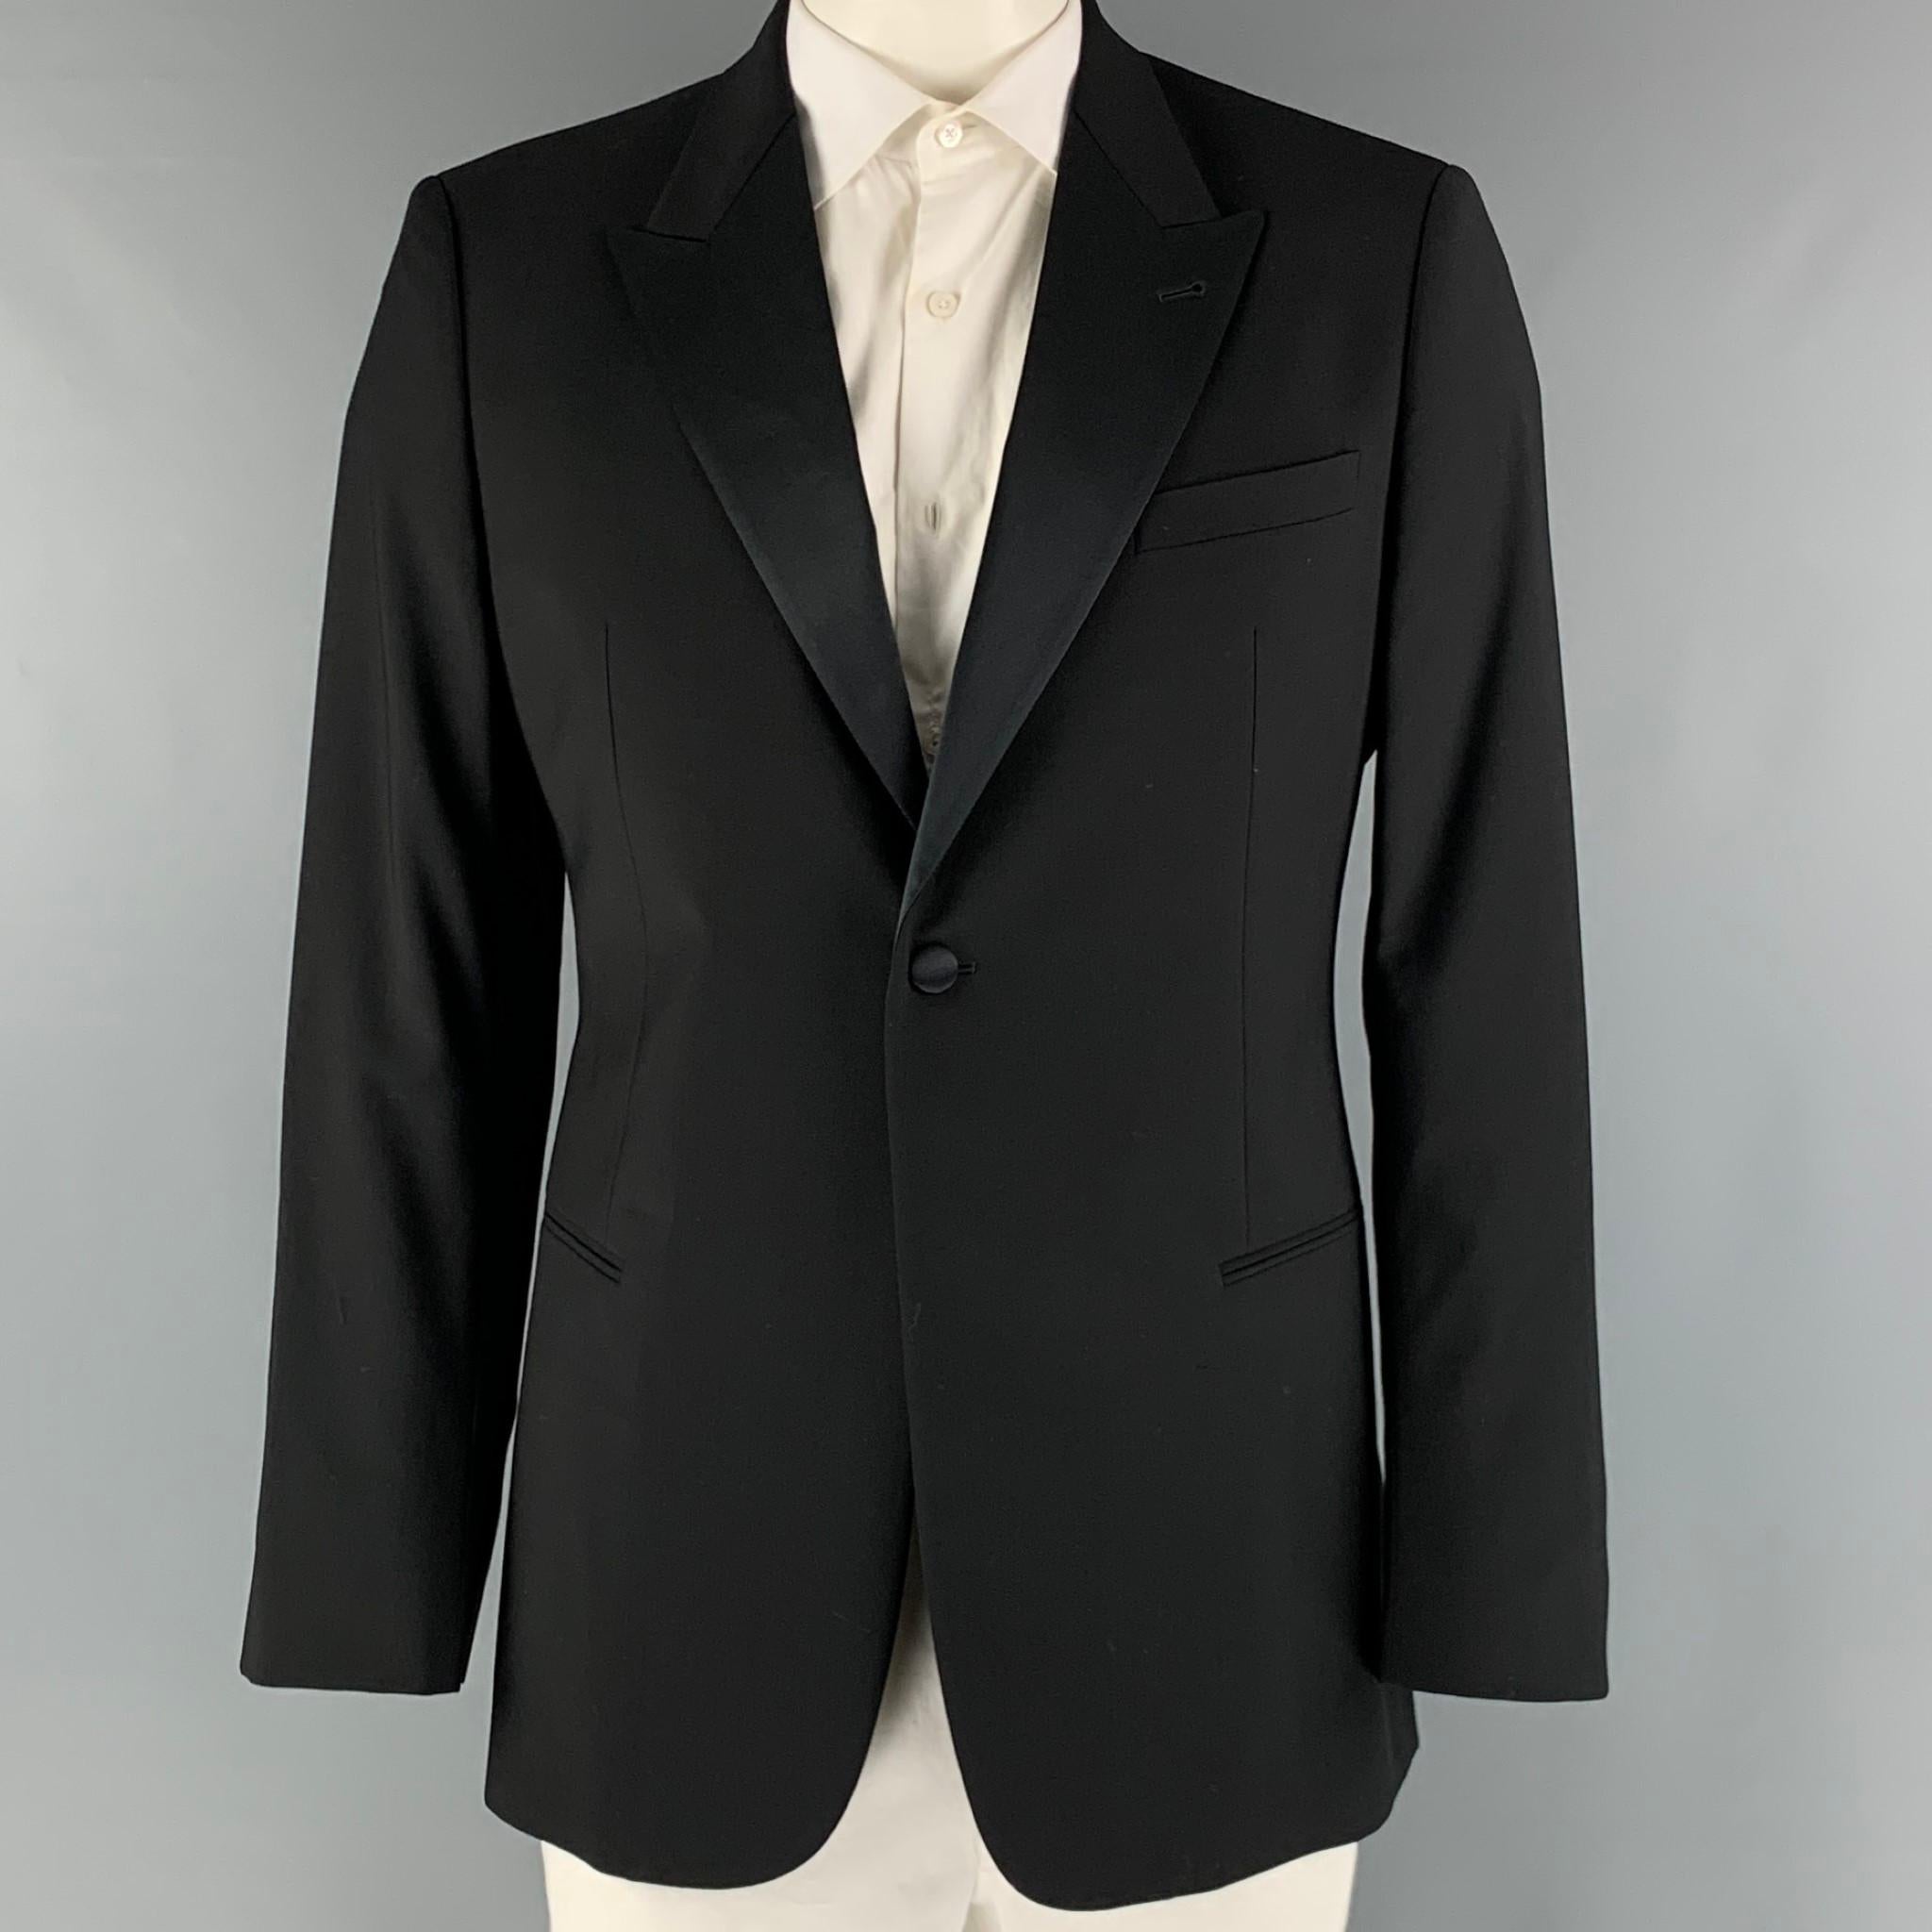 EMPORIO ARMANI tuxedo sport coat comes in a black wool woven material with a full liner featuring a peak lapel, welt pockets, and a single button closure. Made in Italy.

Excellent Pre-Owned Condition.
Marked: 52

Measurements:

Shoulder: 18.5